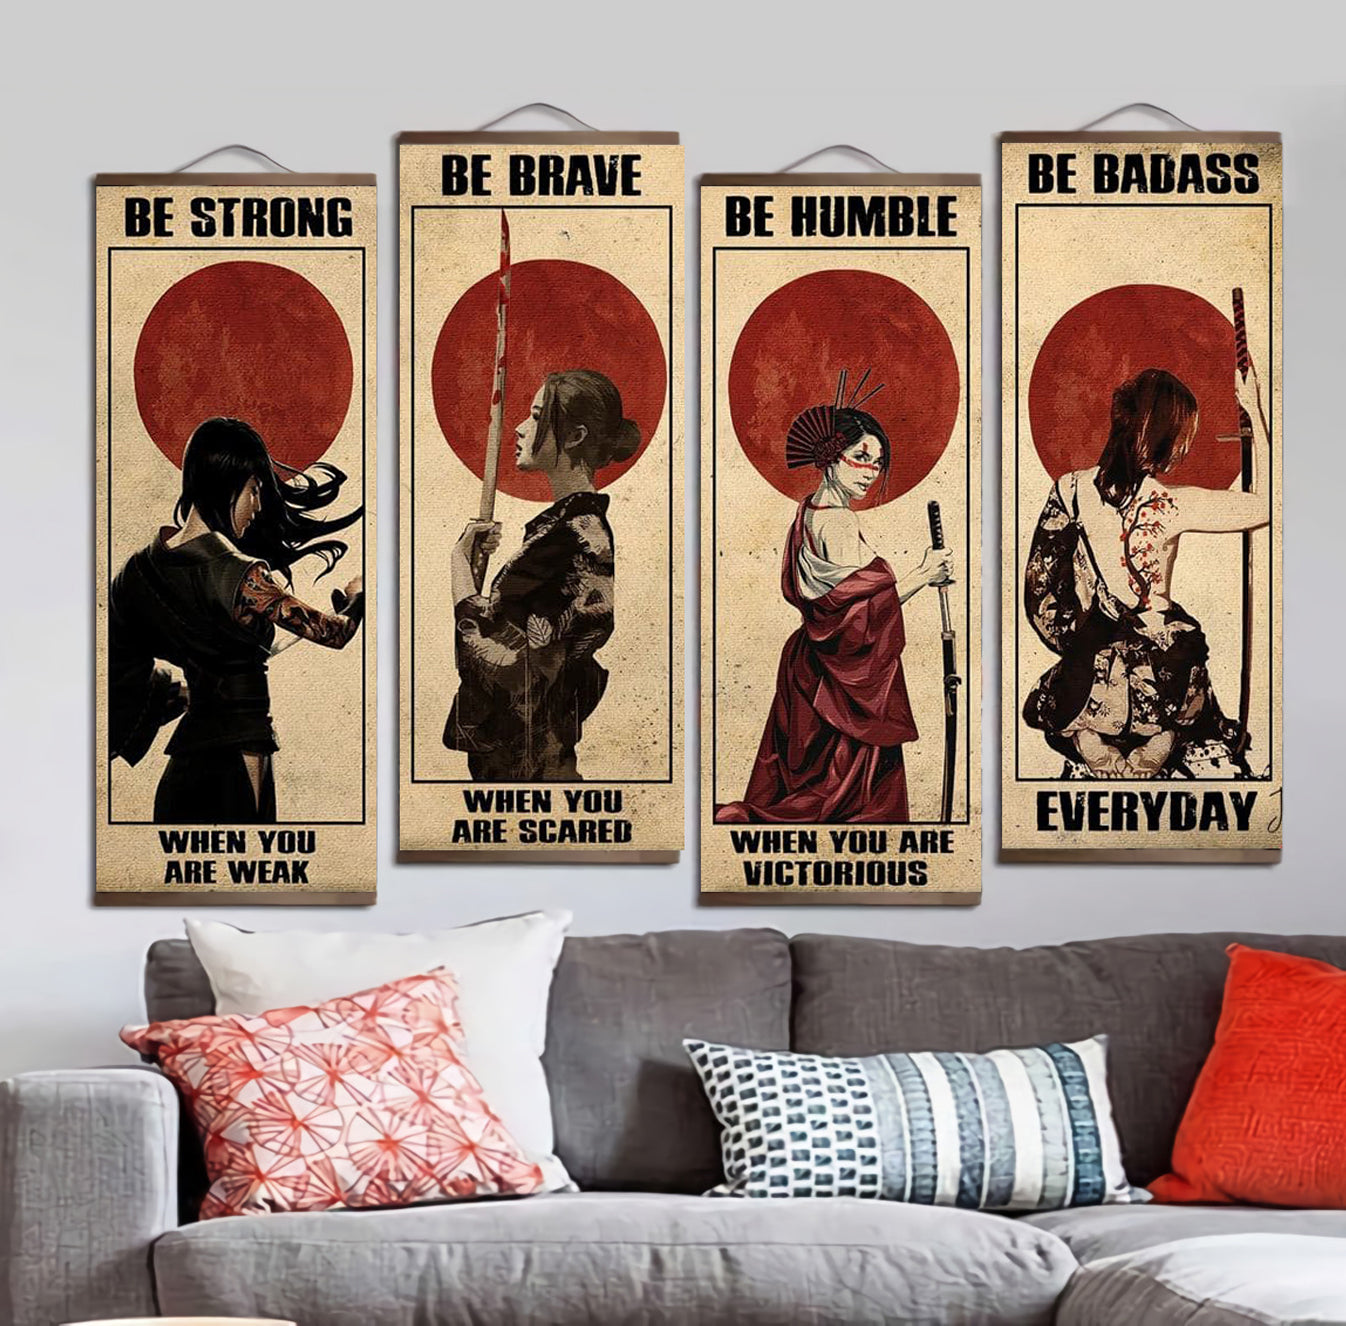 Spartan Samurai hanging canvas be strong be brave